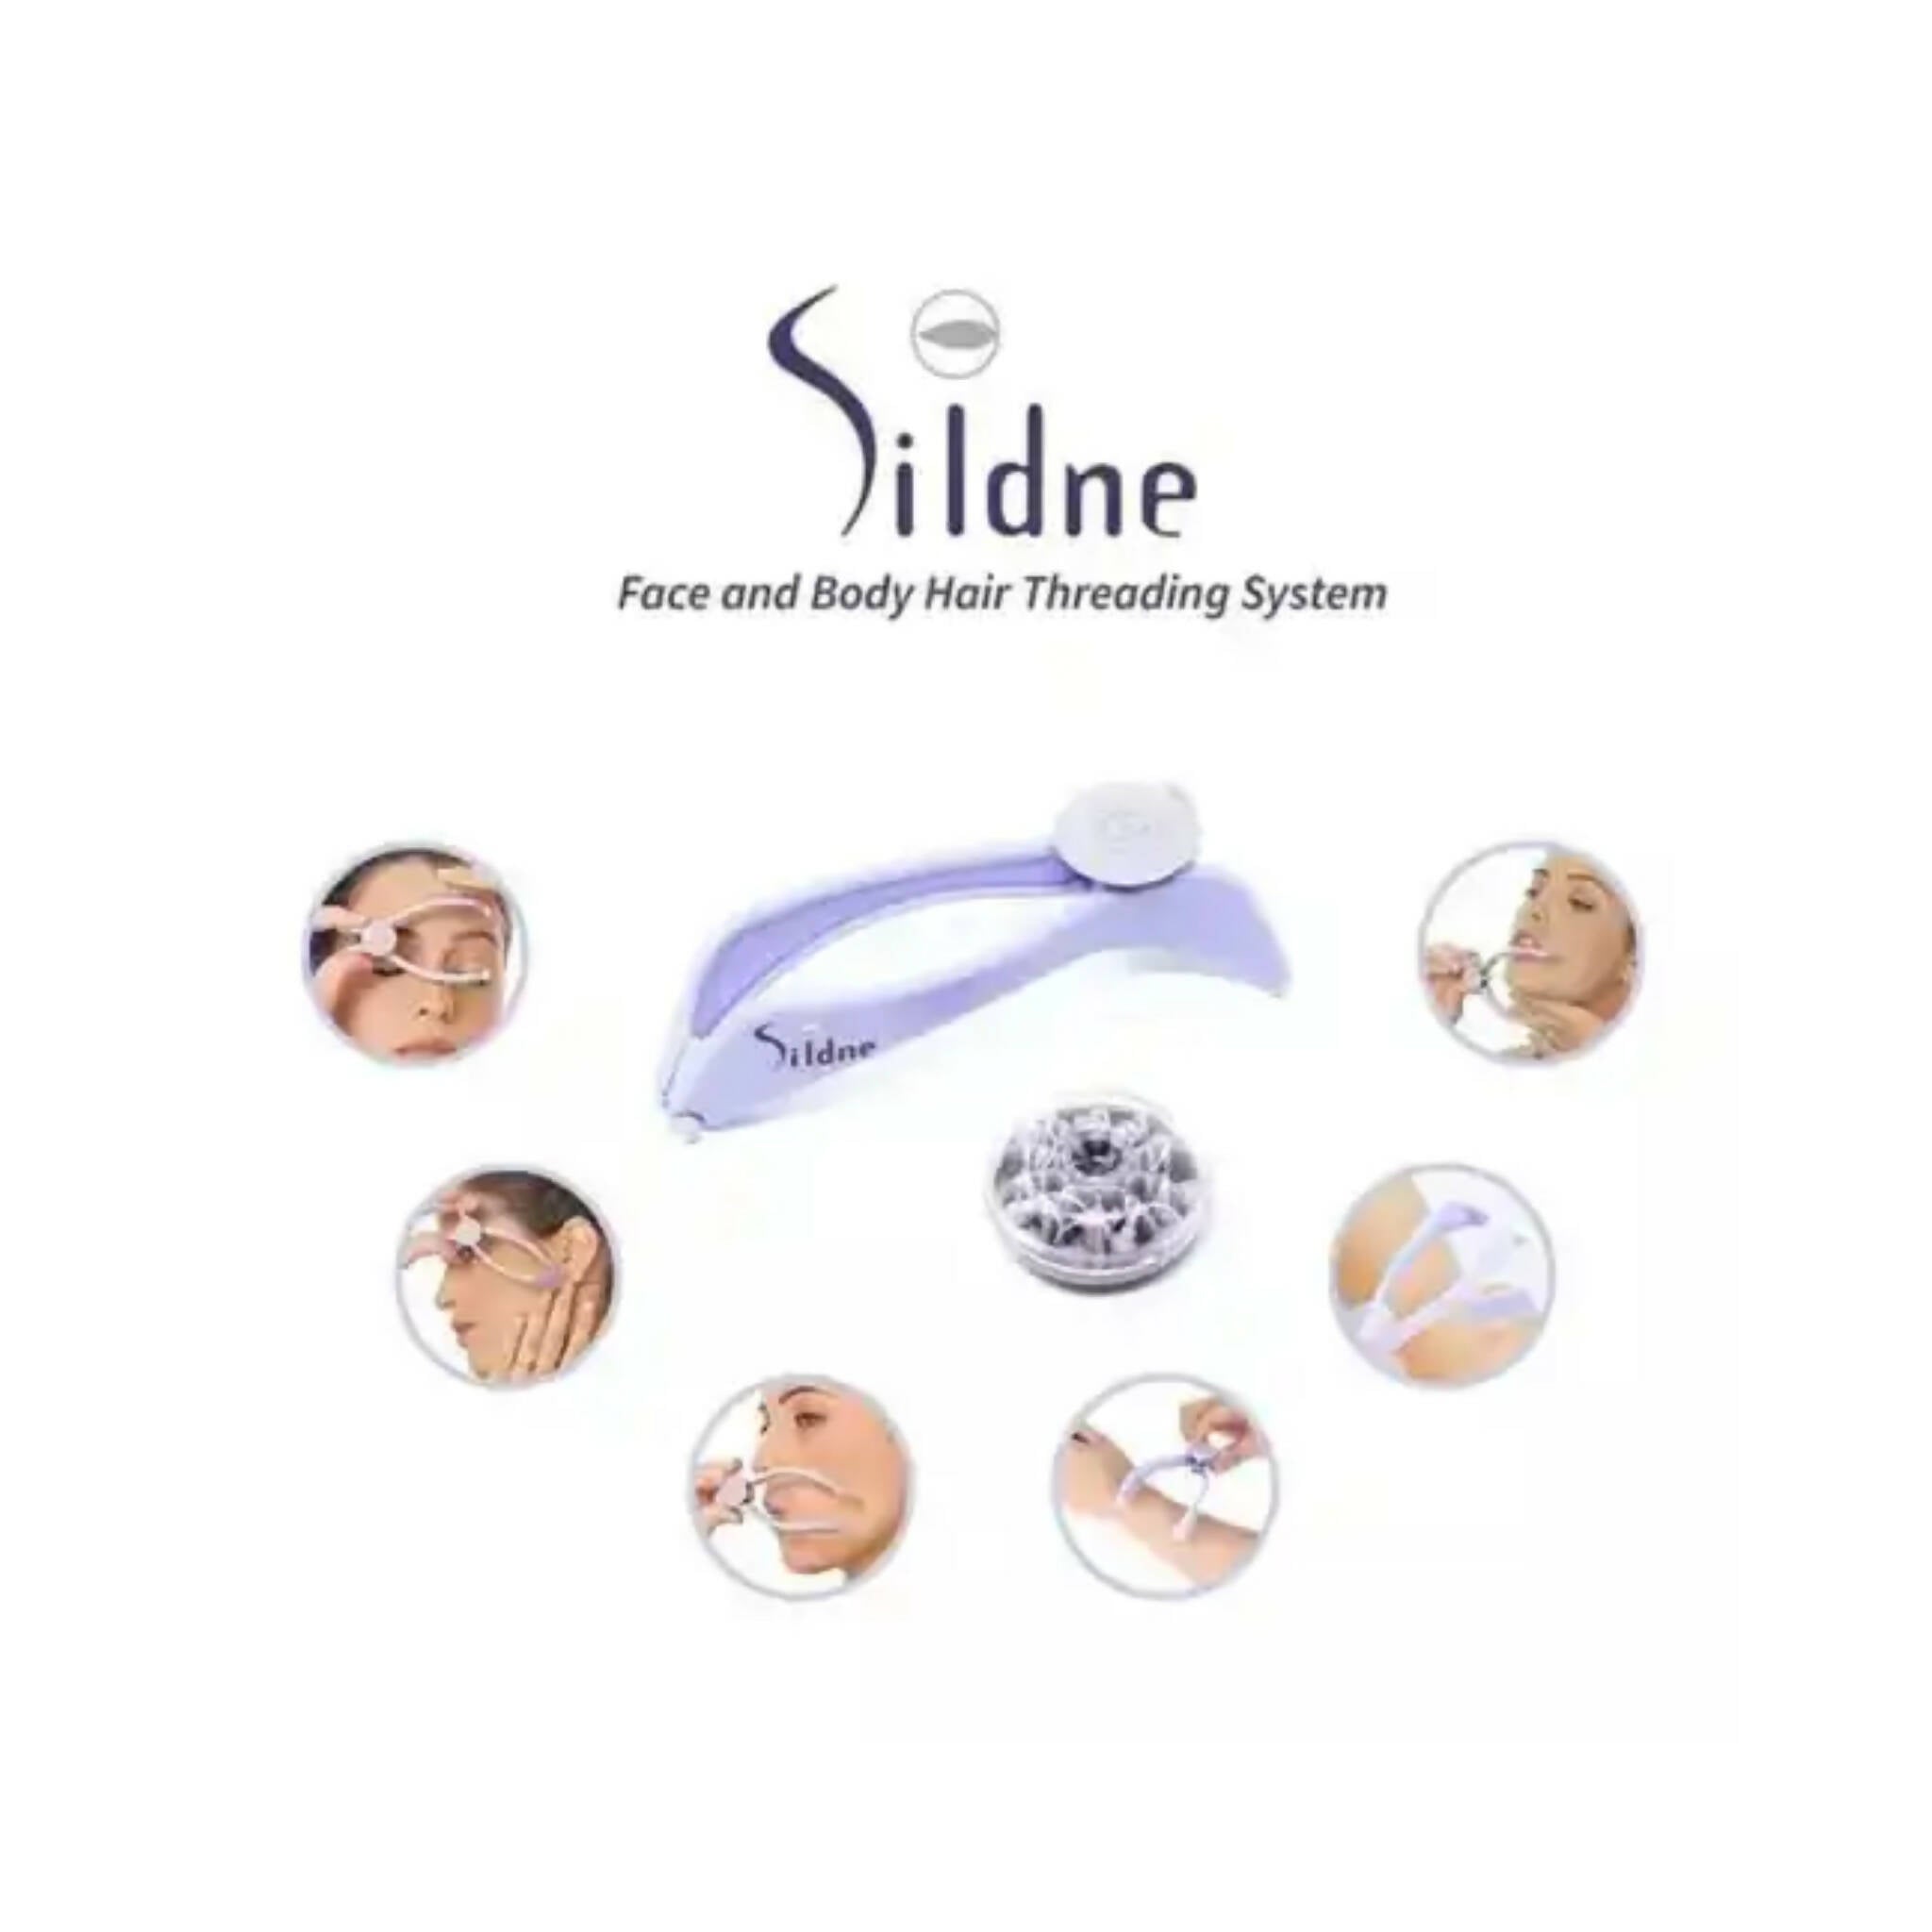 Hair Removal, Smooth, Quick, & Painless, with Sildne Threading System